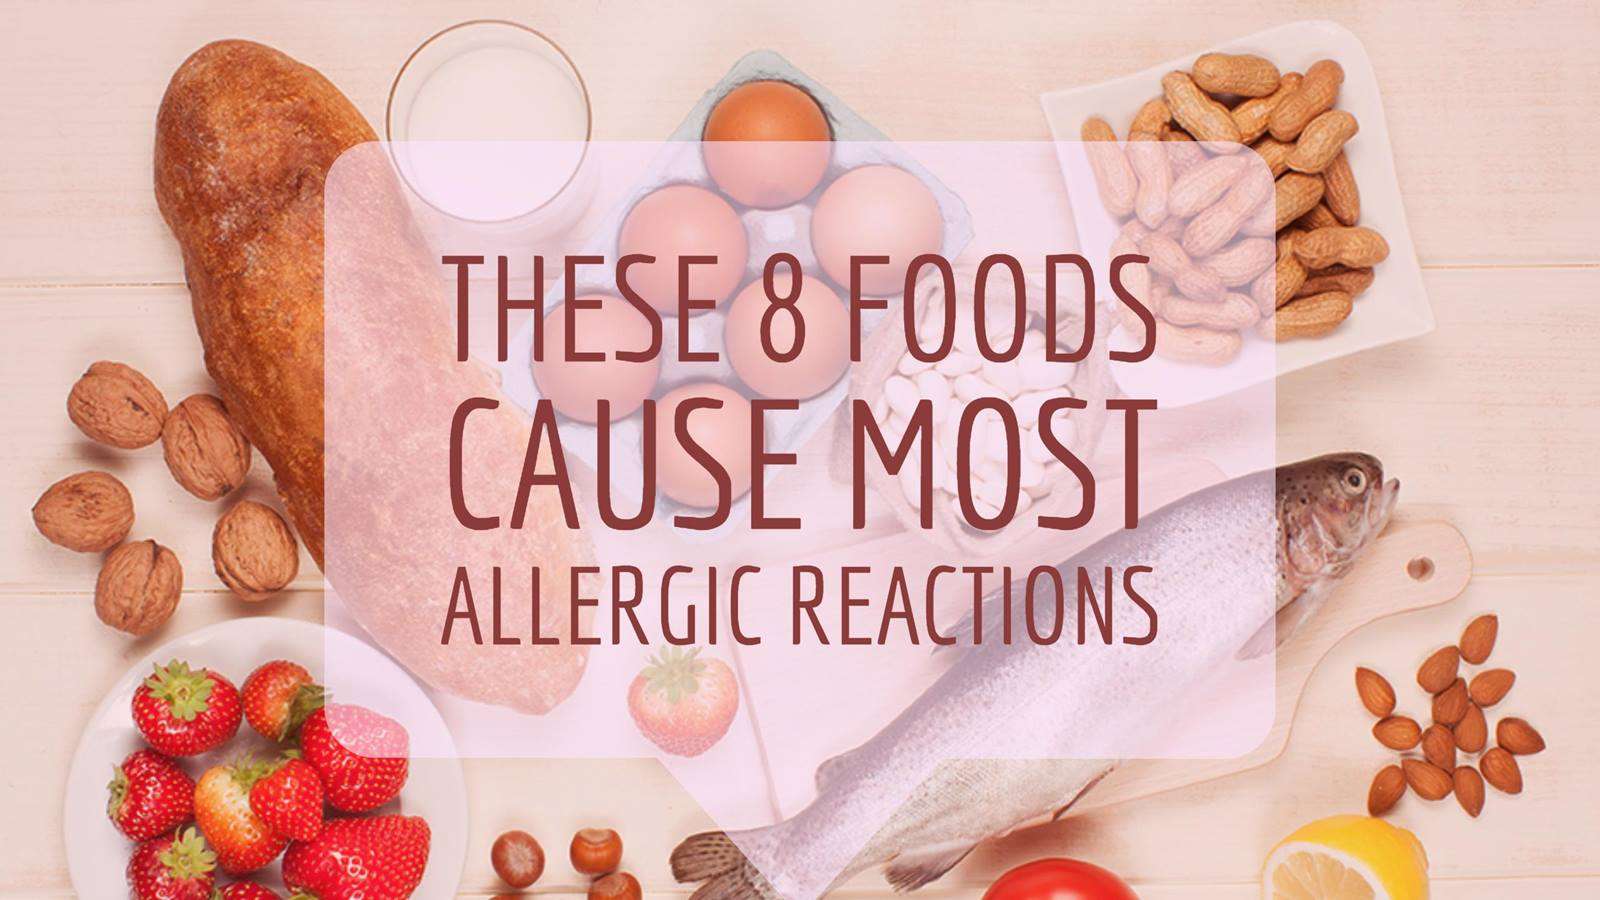 These 8 Foods Cause the Most Allergic Reactions